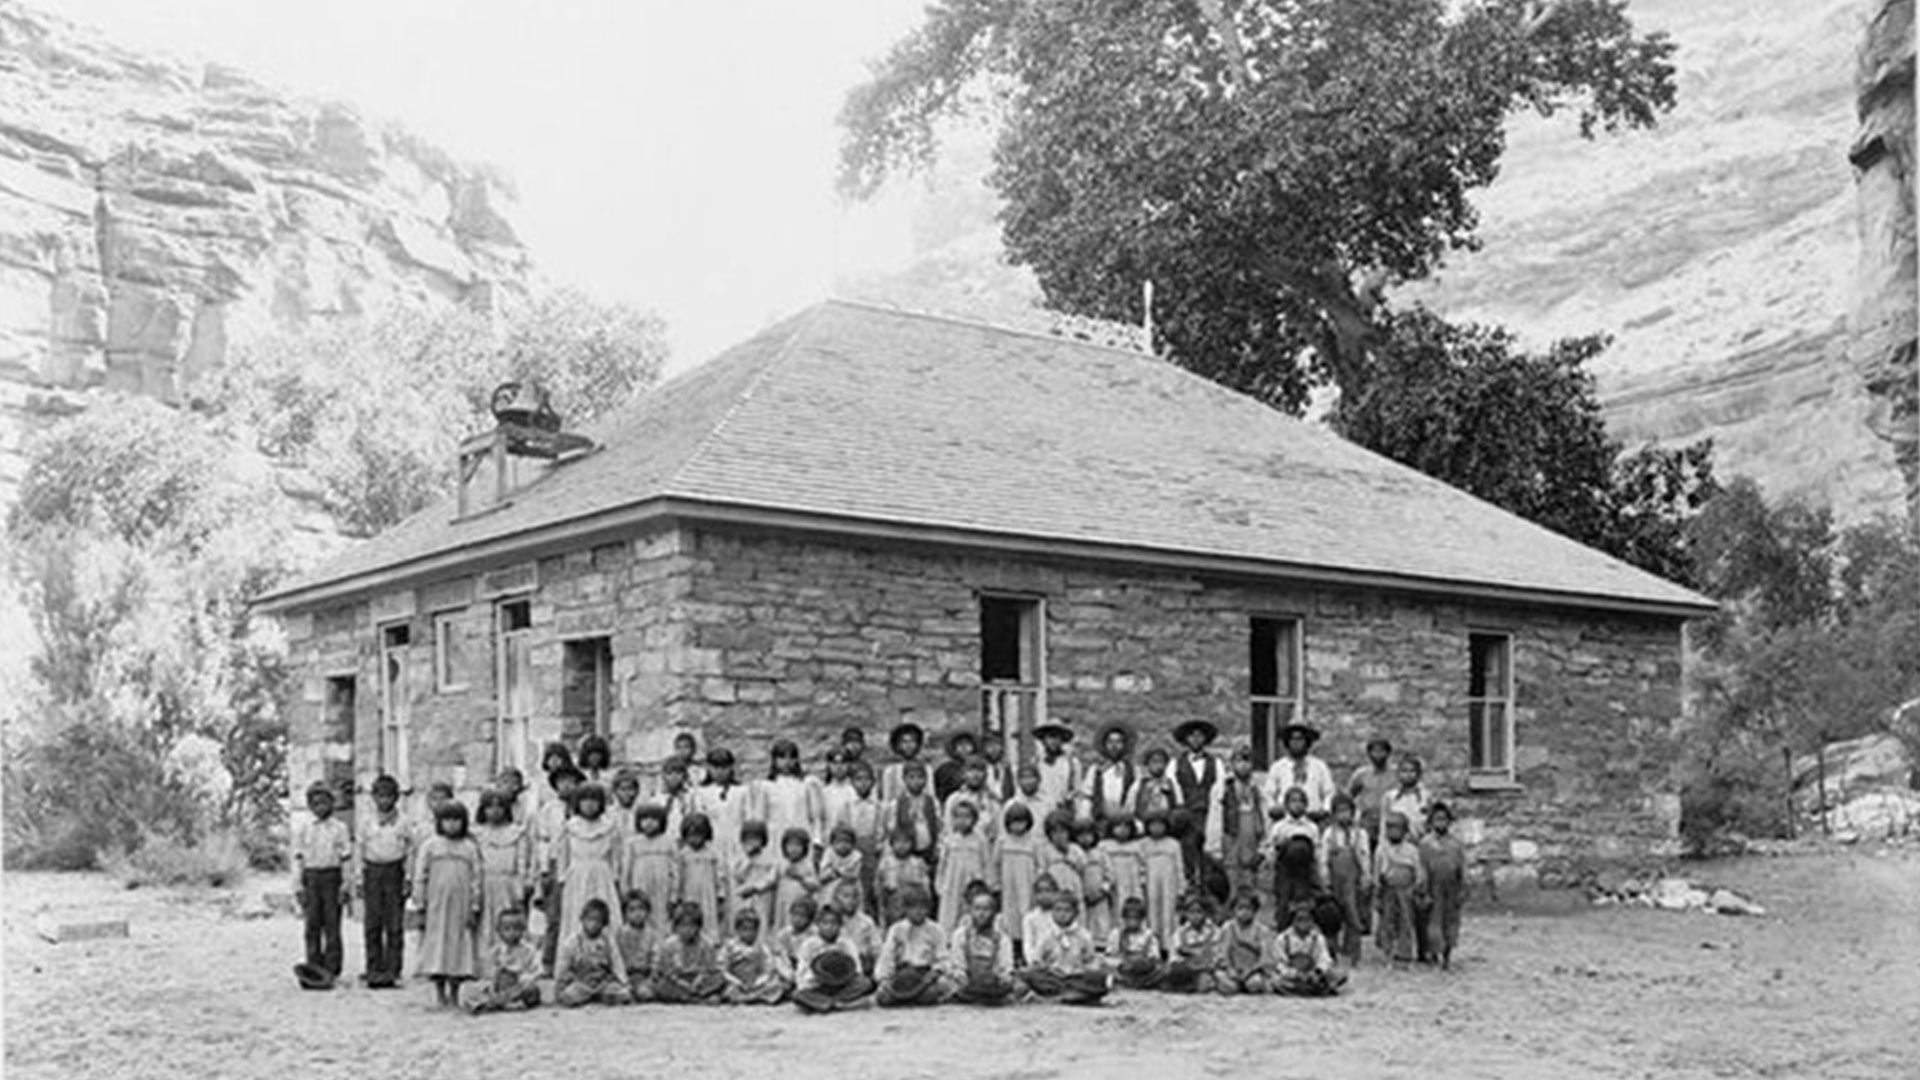 Children at Havasupai Indian School in Cataract Canyon, Arizona, in 1901. Arizona had scores of such boarding schools for Native children in the 19th and 20th centuries.